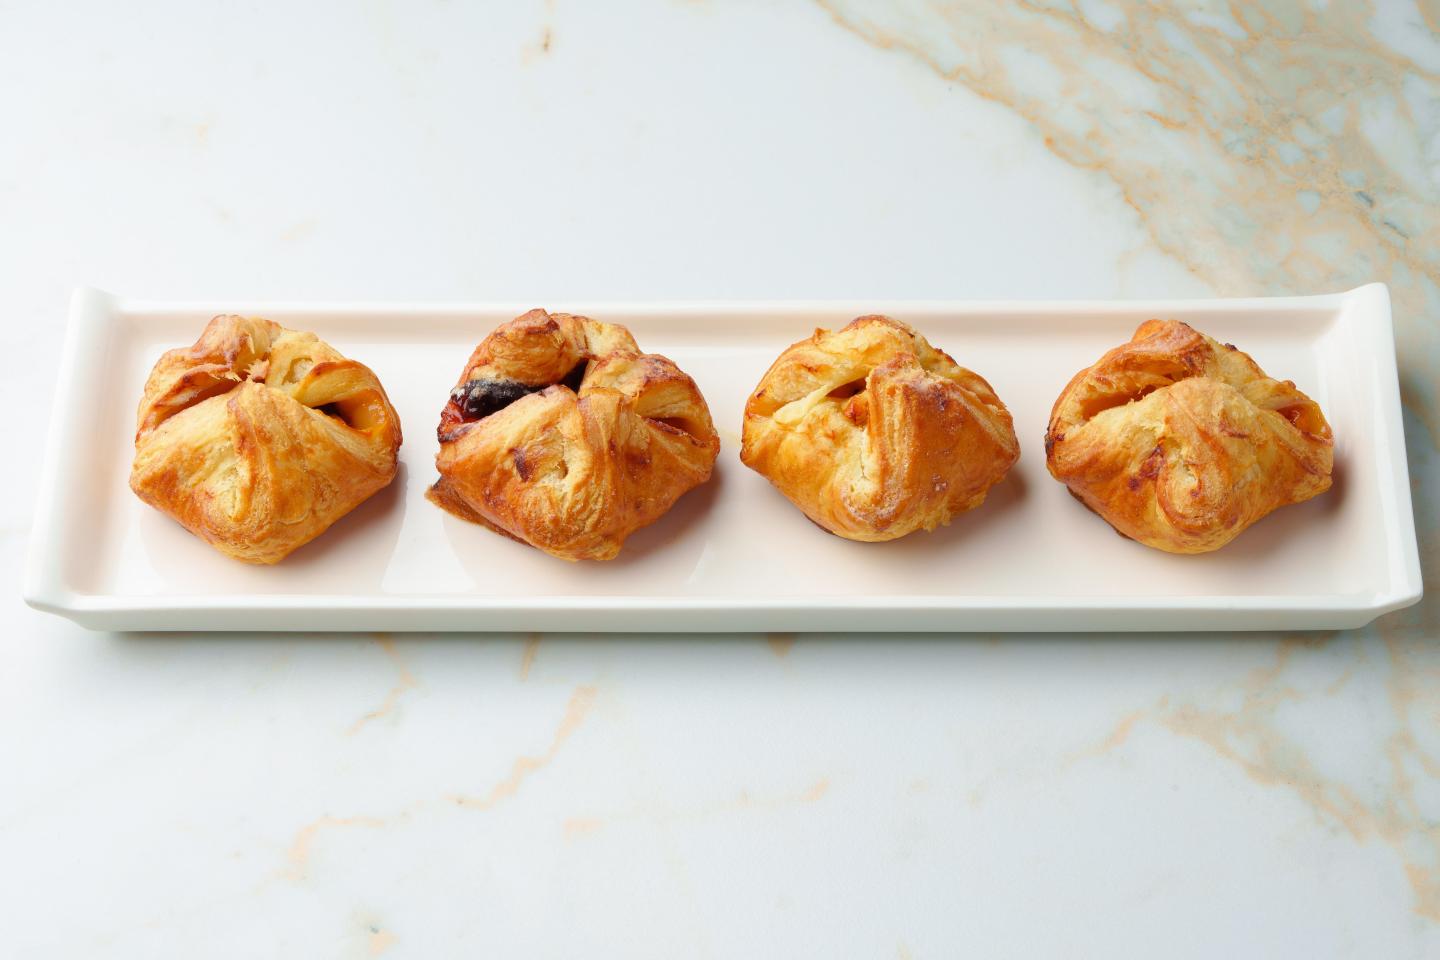 Four croissants on a plate